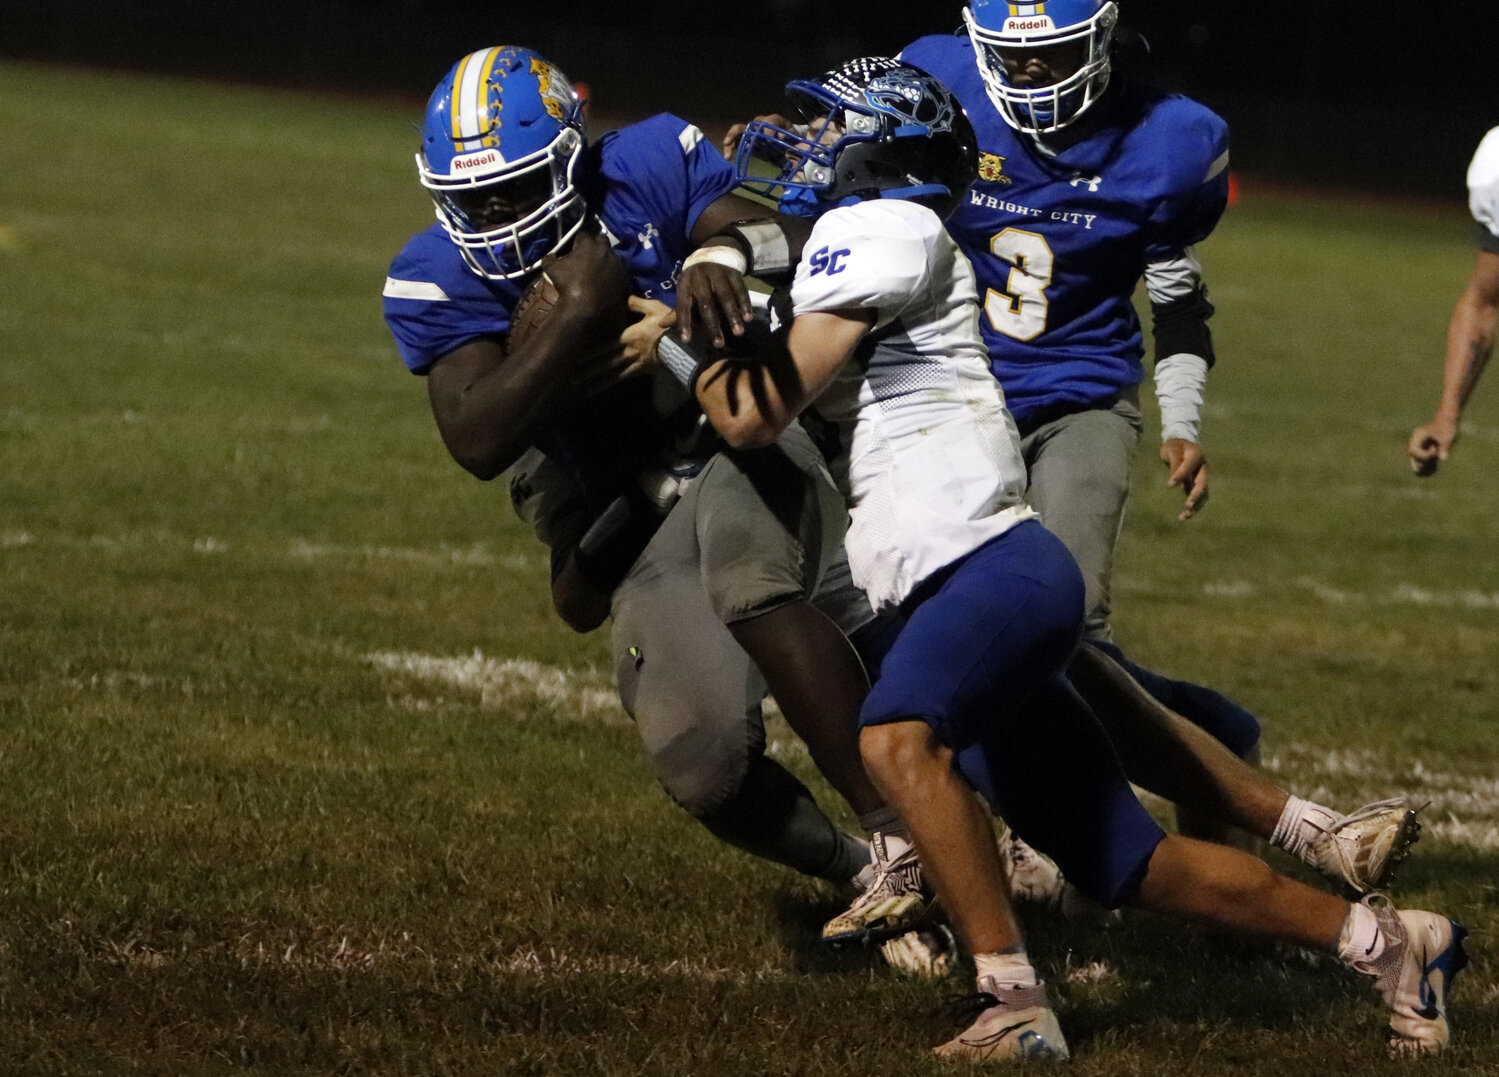 Carle'on Jones (left) fights through a tackle during a game against South Callaway earlier this season. Jones was named to the EMO first team as a linebacker.